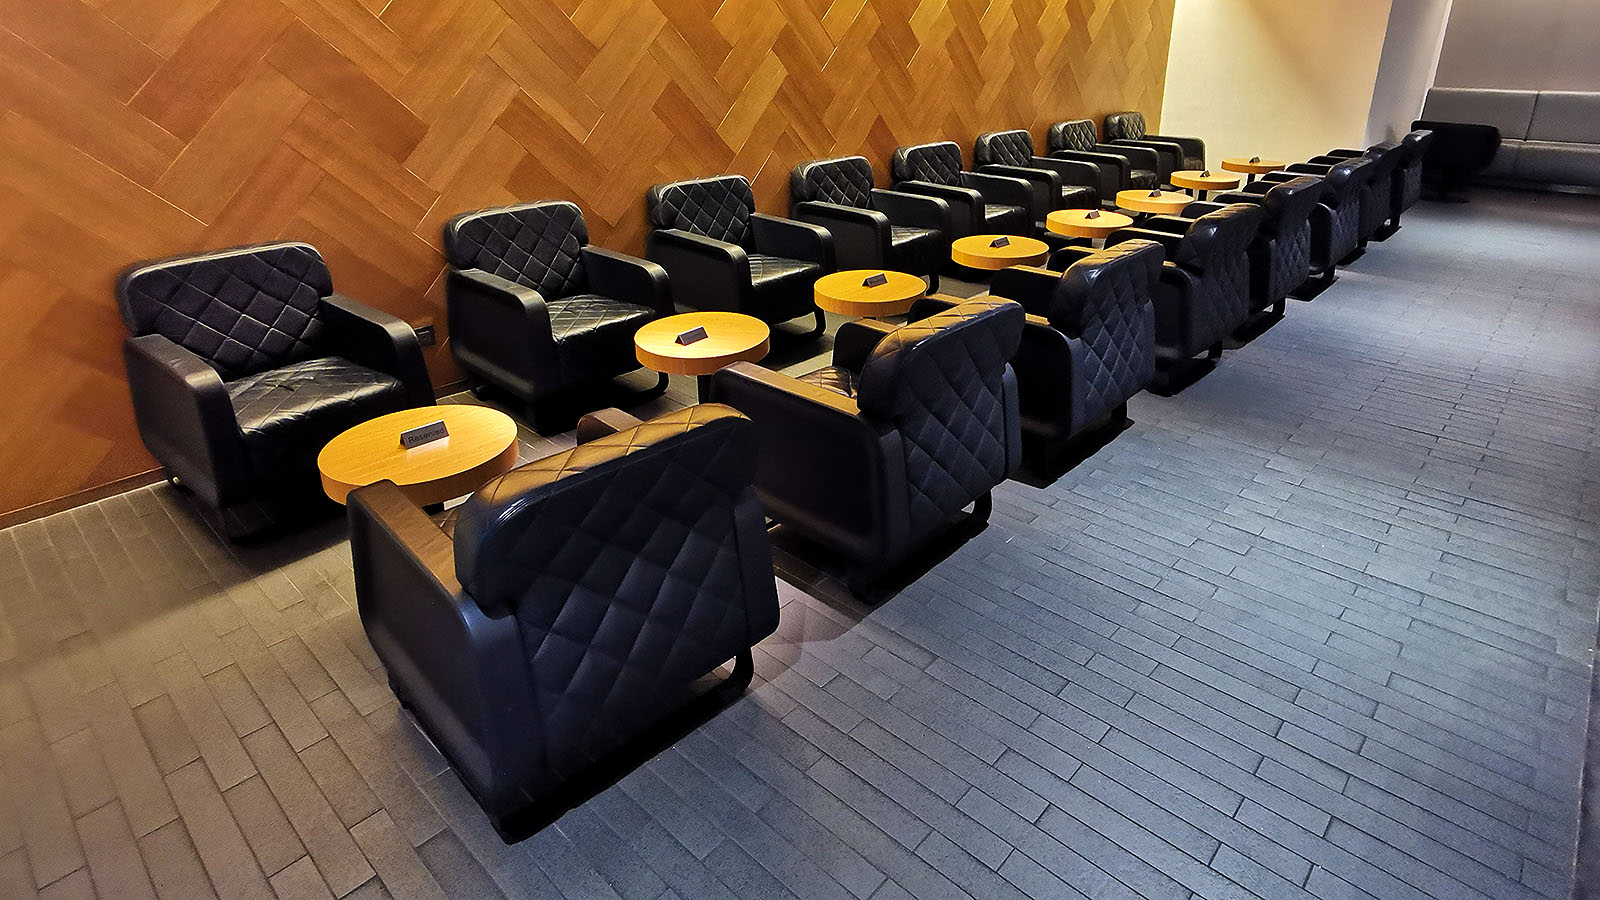 Reserved signs on tables at the Qantas International Business Lounge in Singapore